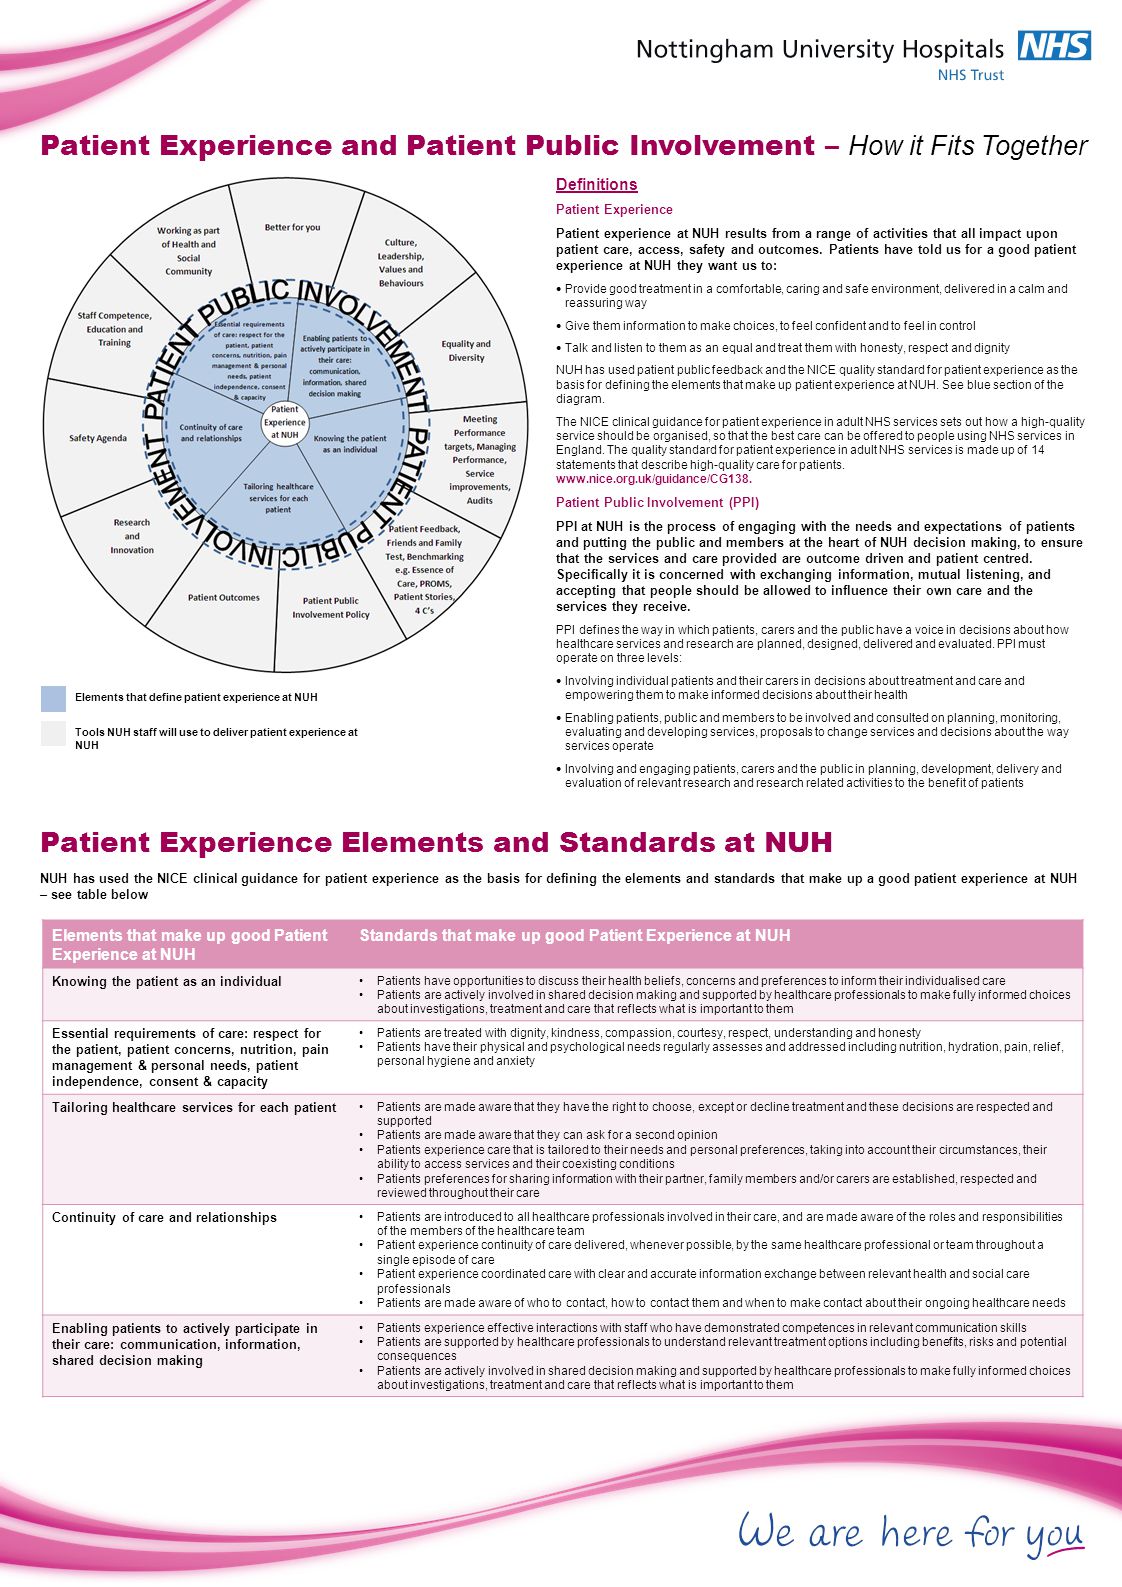 Definitions Patient Experience Patient experience at NUH results from a range of activities that all impact upon patient care, access, safety and outcomes.